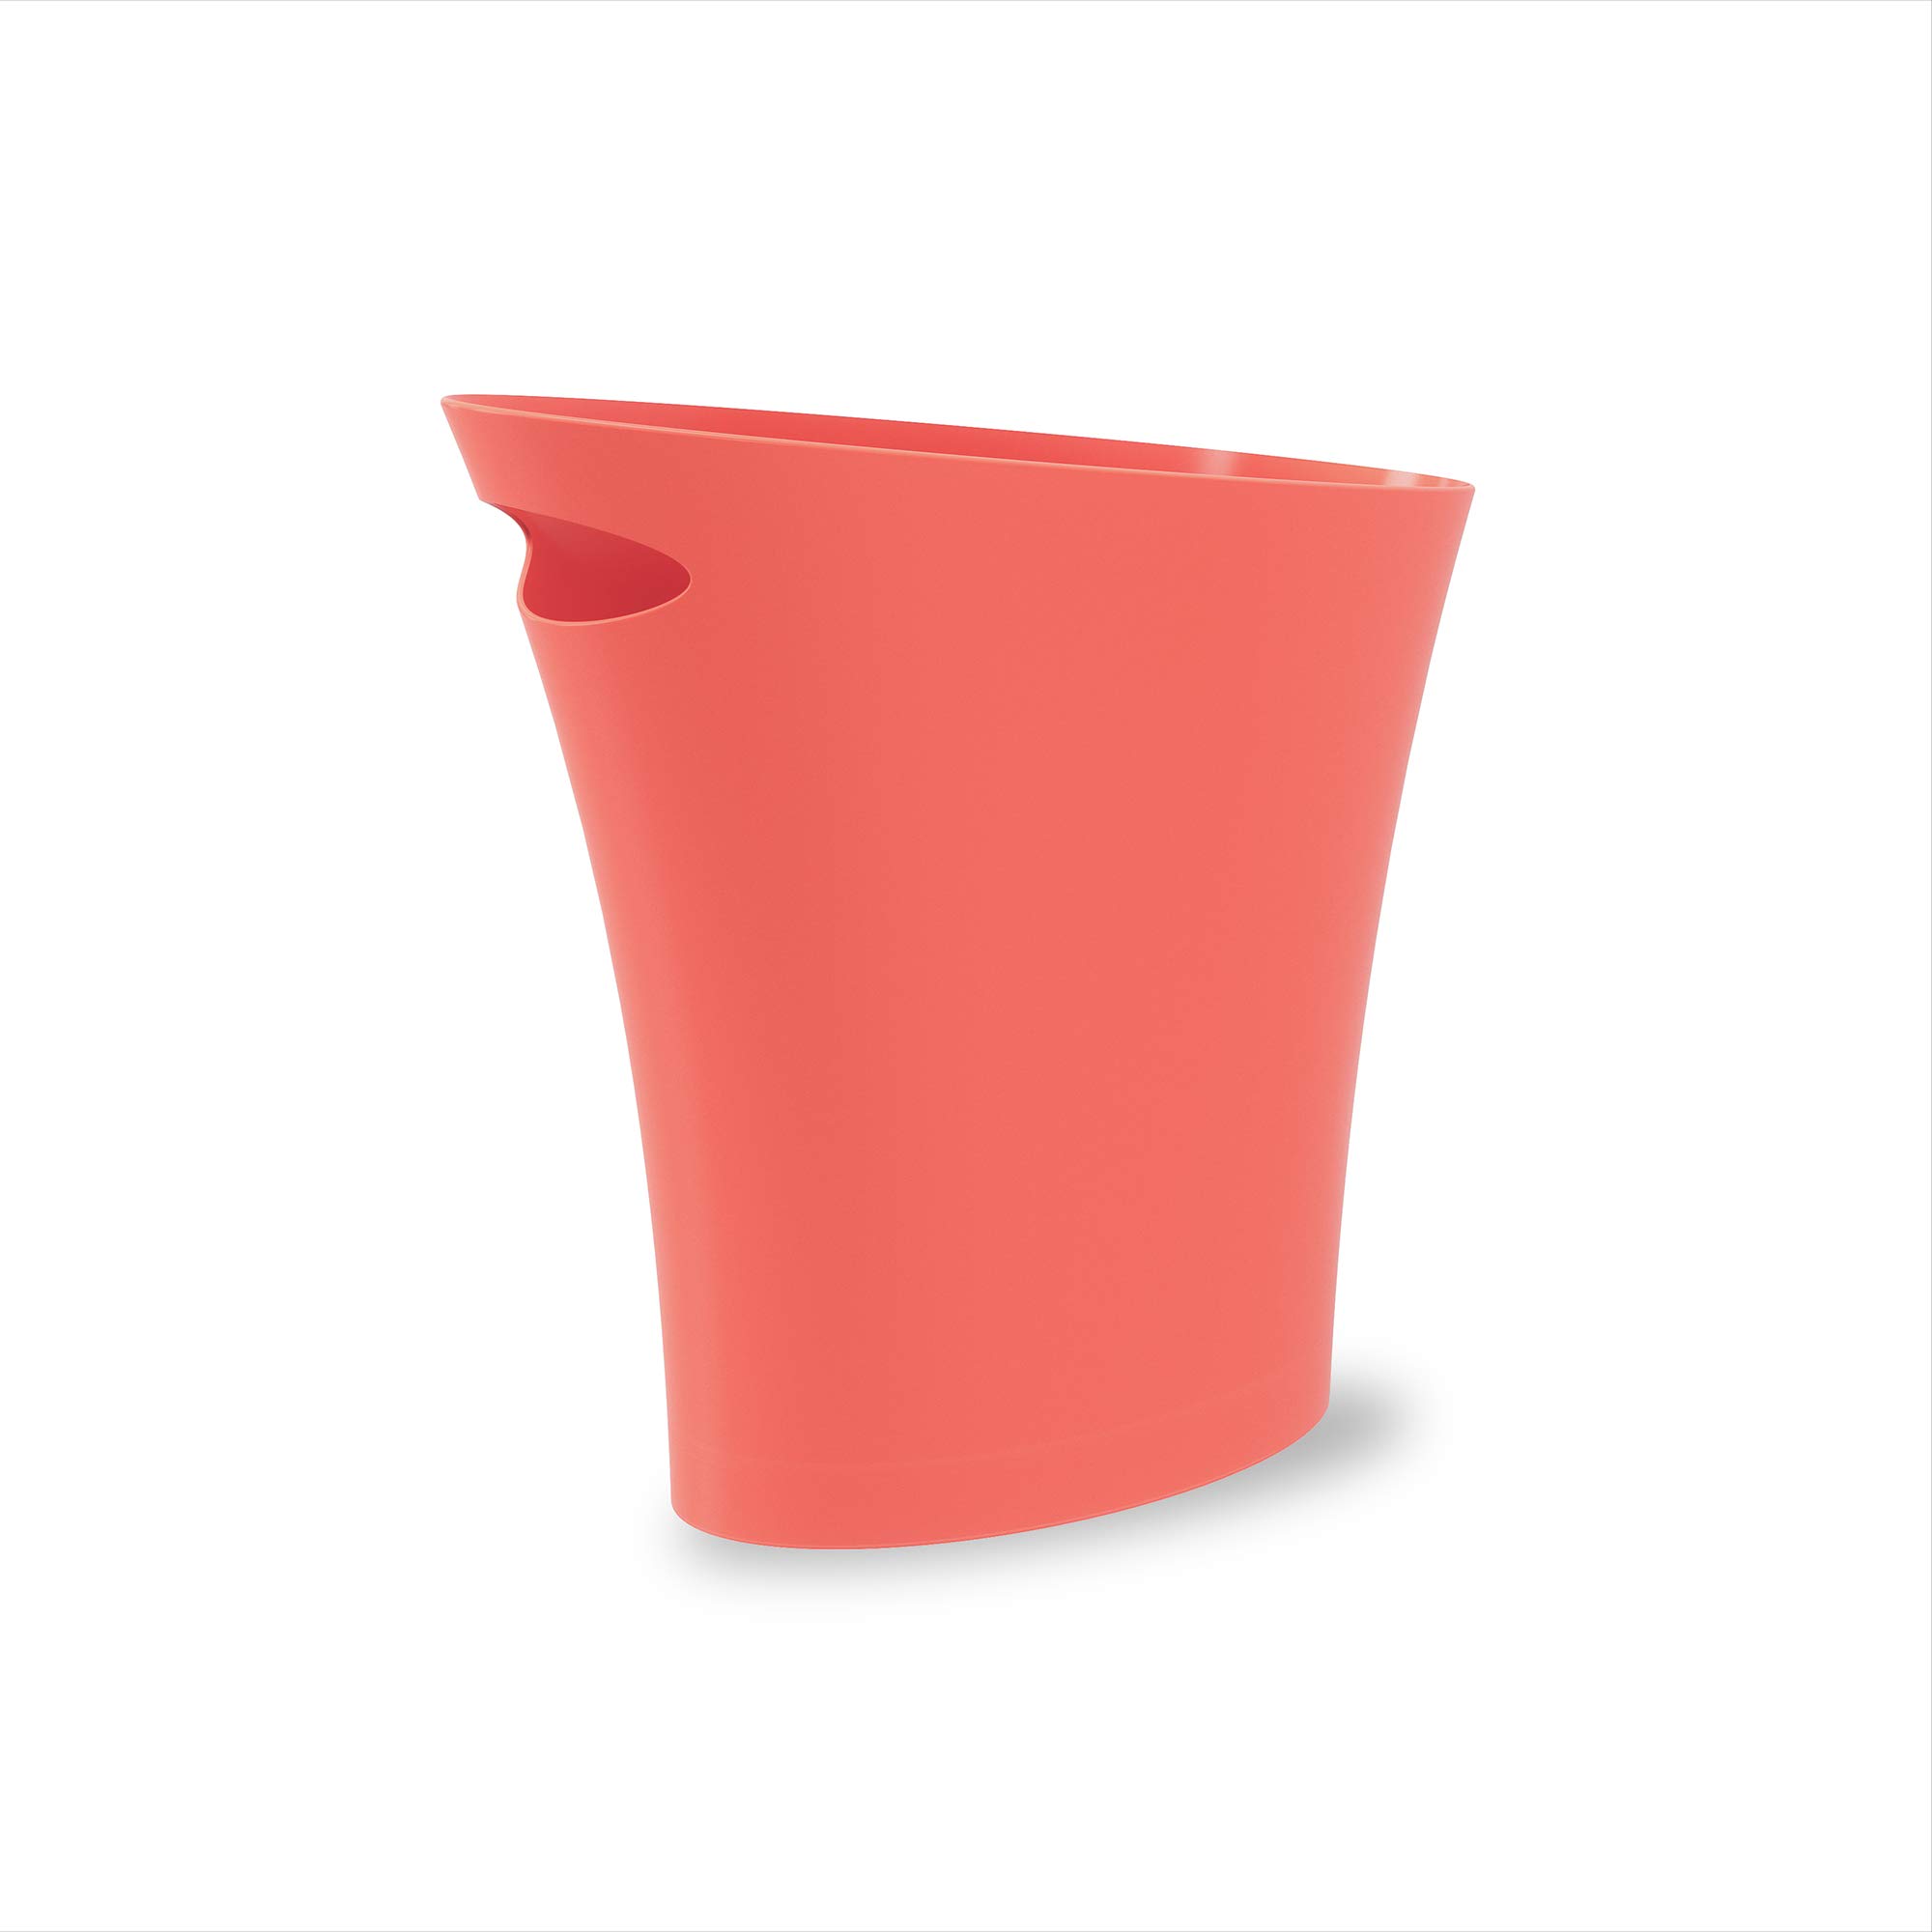 Book Cover Umbra 082610-180 Skinny, Coral Sleek & Stylish Bathroom Trash, Small Garbage Can, Wastebasket for Narrow Spaces at Home or Office, 2 Gallon Capacity, Single Pack Single Pack Coral